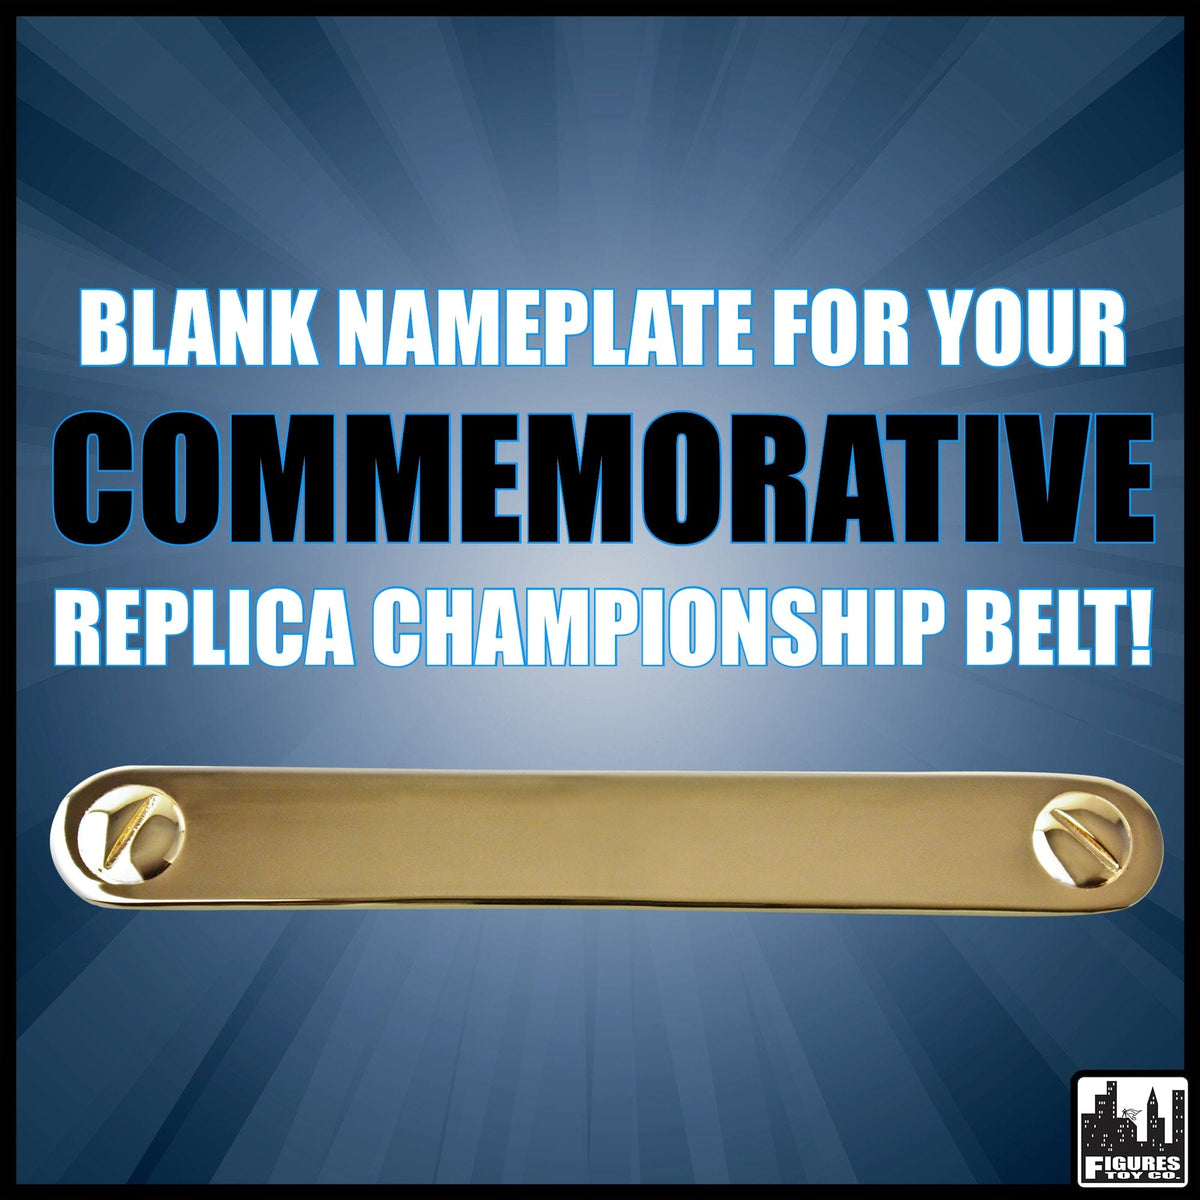 BLANK Nameplate for WWE Replica Commemorative Championship Belts